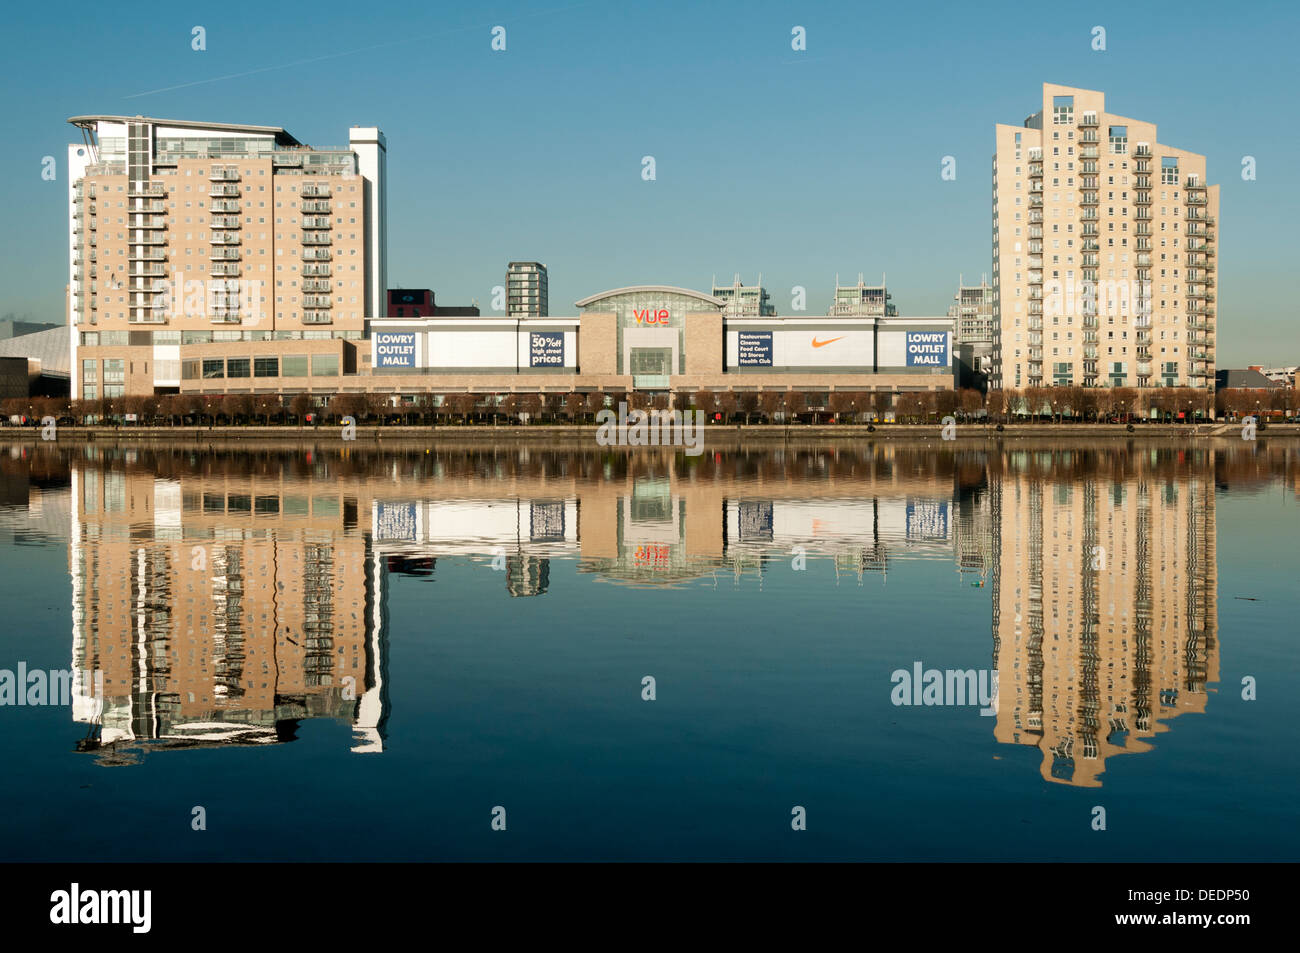 Imperial Point, Sovereign Point apartment bloc and the Lowry Outlet Mall reflected in Salford Quays, Manchester, England, UK Stock Photo